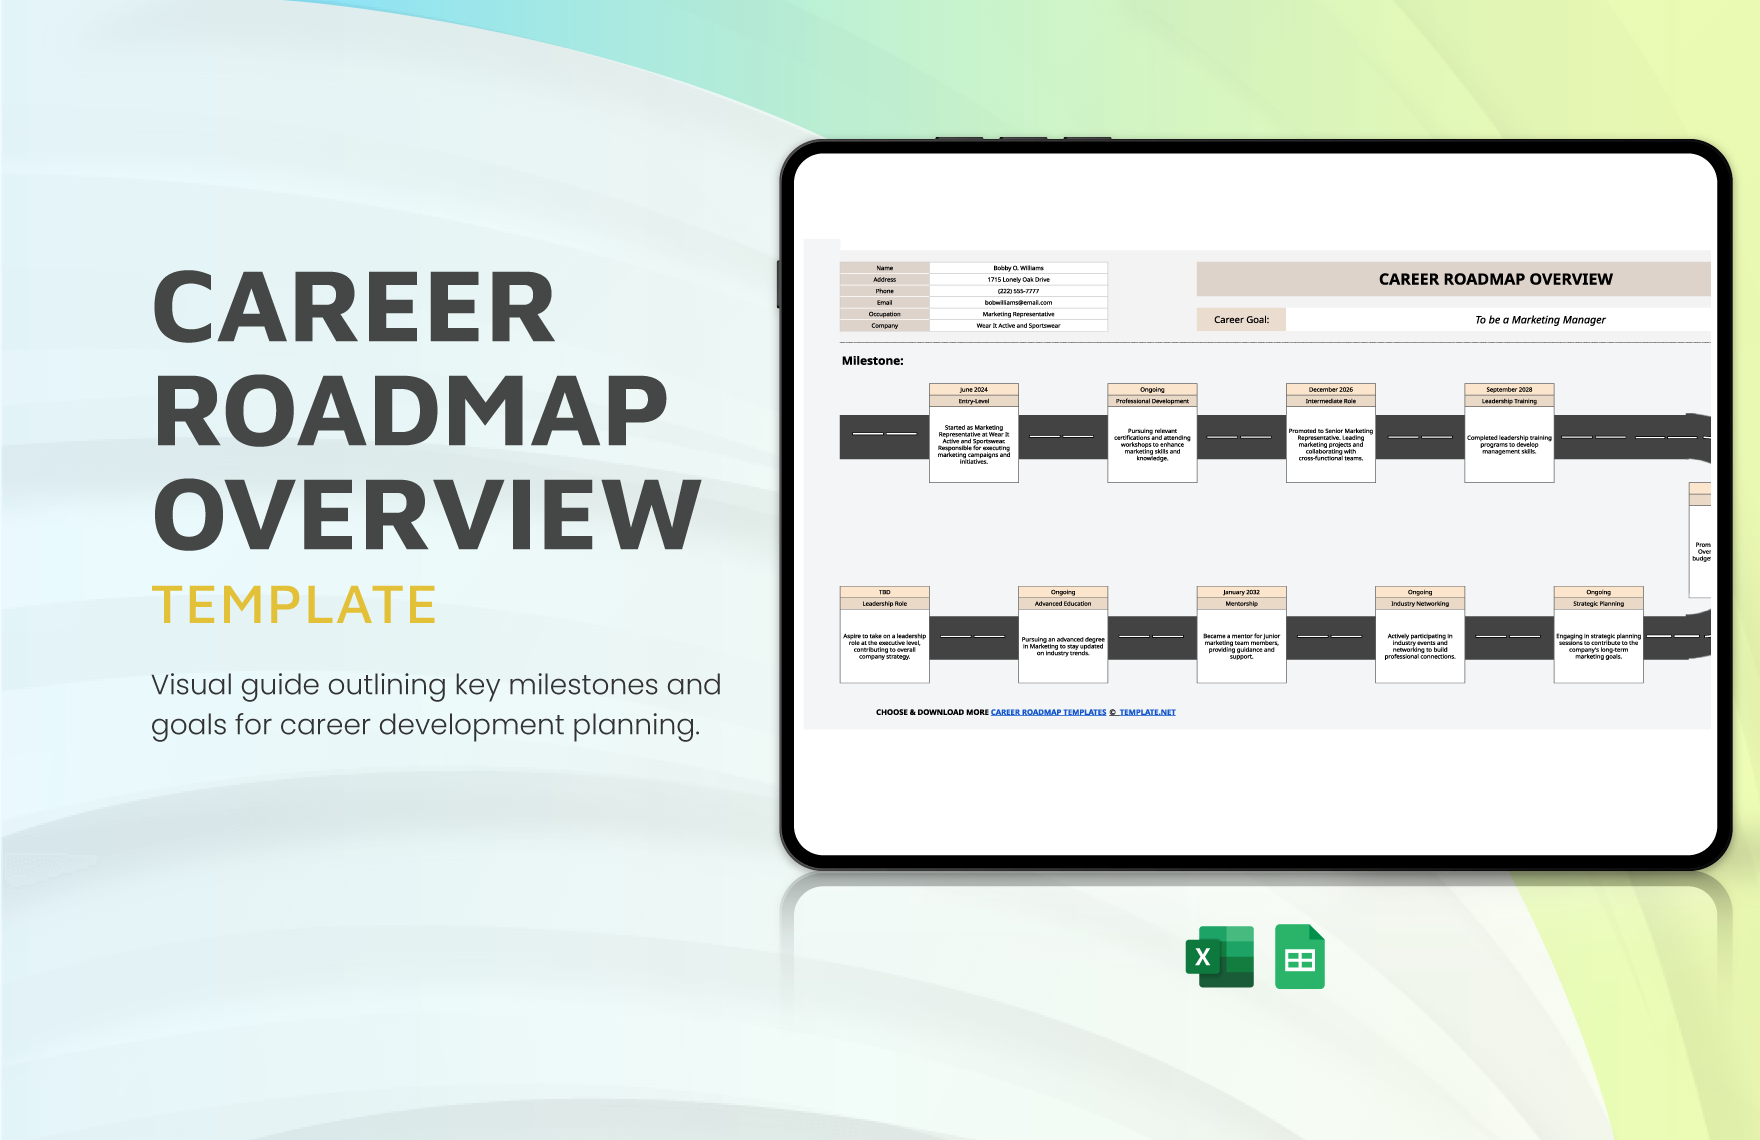 Career Roadmap Overview Template